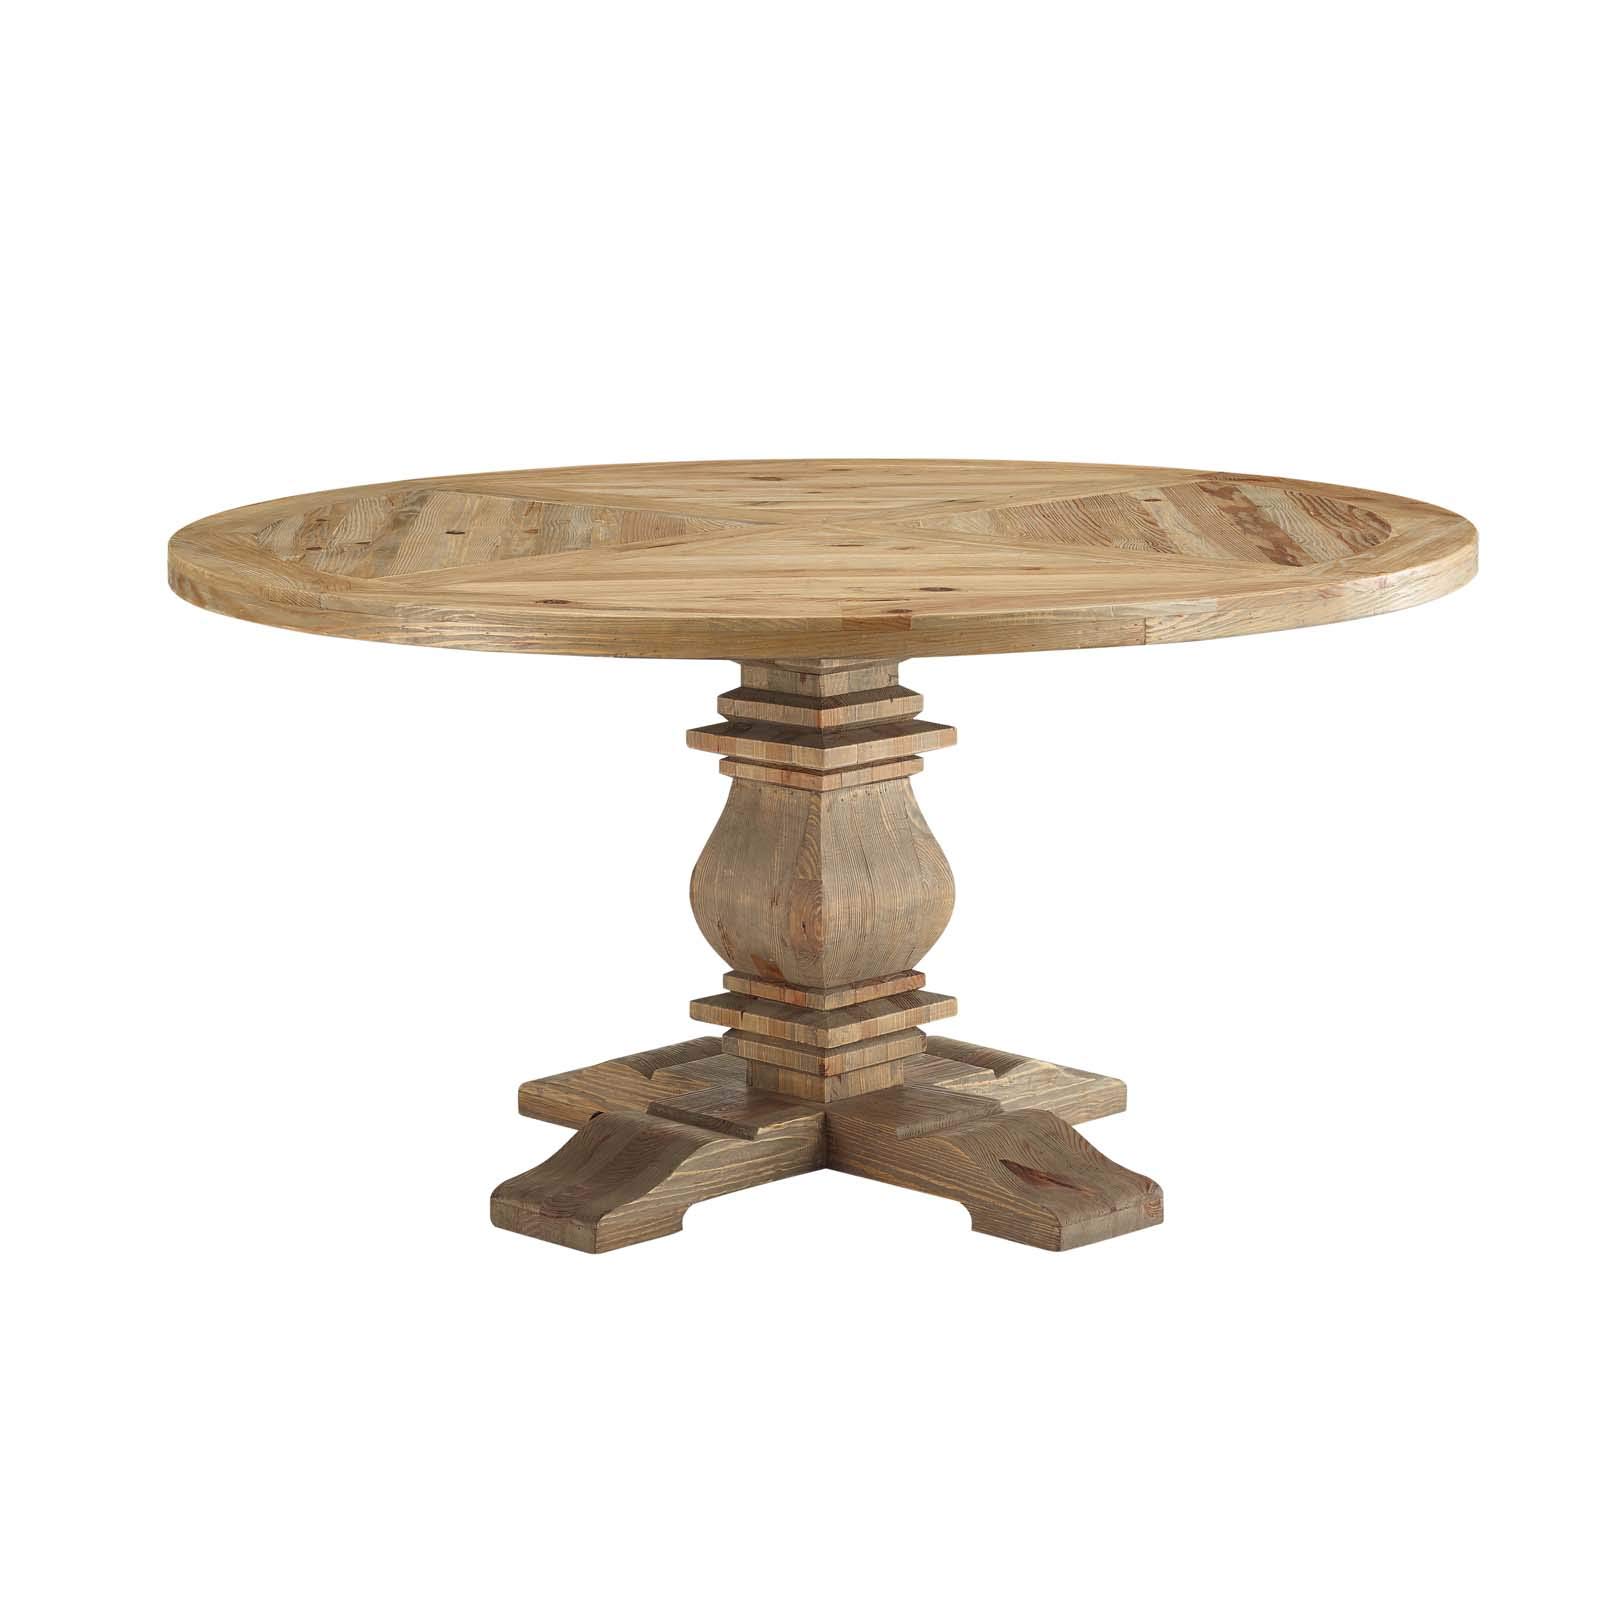 Modway Column 59" Rustic Farmhouse Pine Wood Round Kitchen and Dining Room Table, Brown